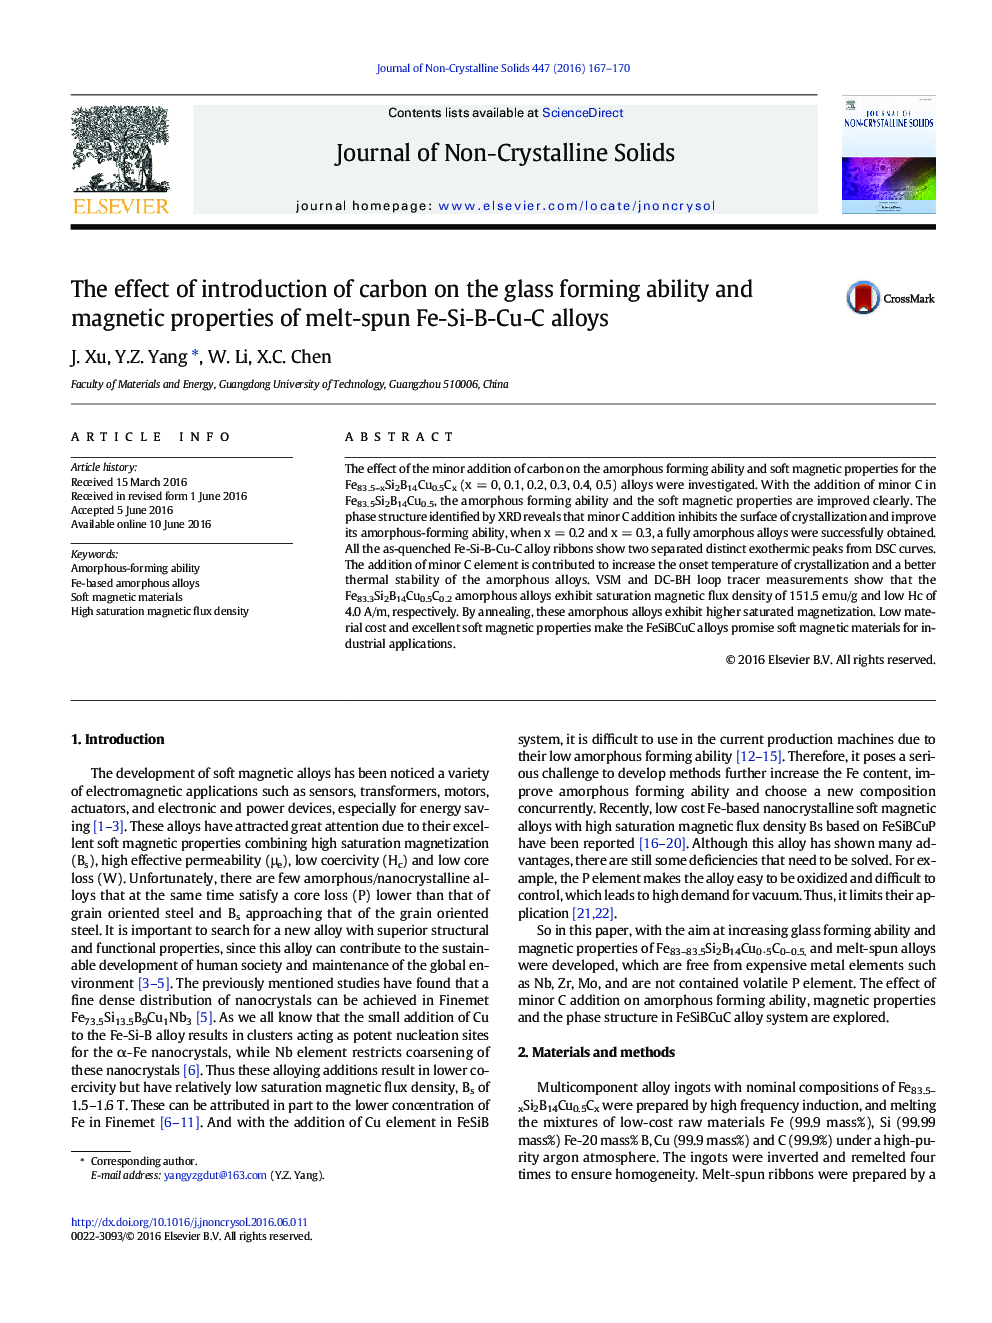 The effect of introduction of carbon on the glass forming ability and magnetic properties of melt-spun Fe-Si-B-Cu-C alloys